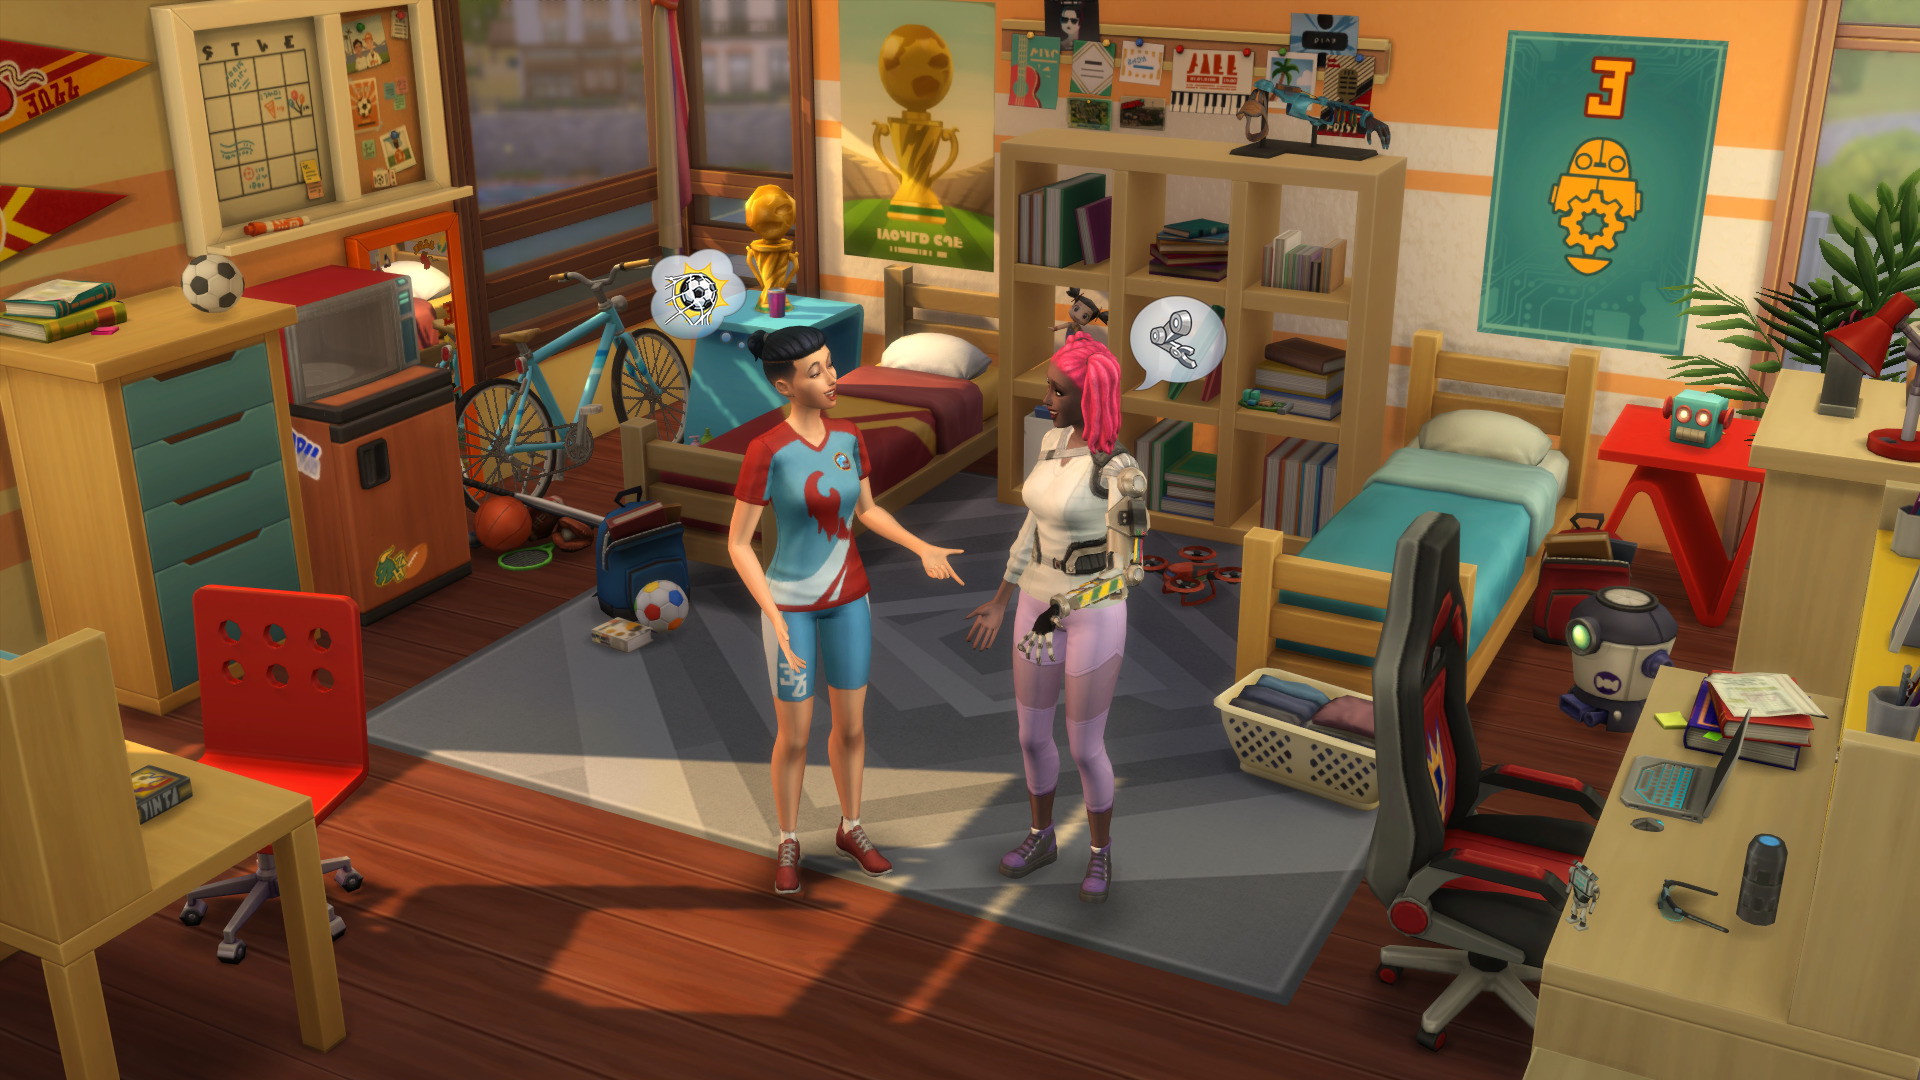 The Sims 4: Discover University - screenshot 4